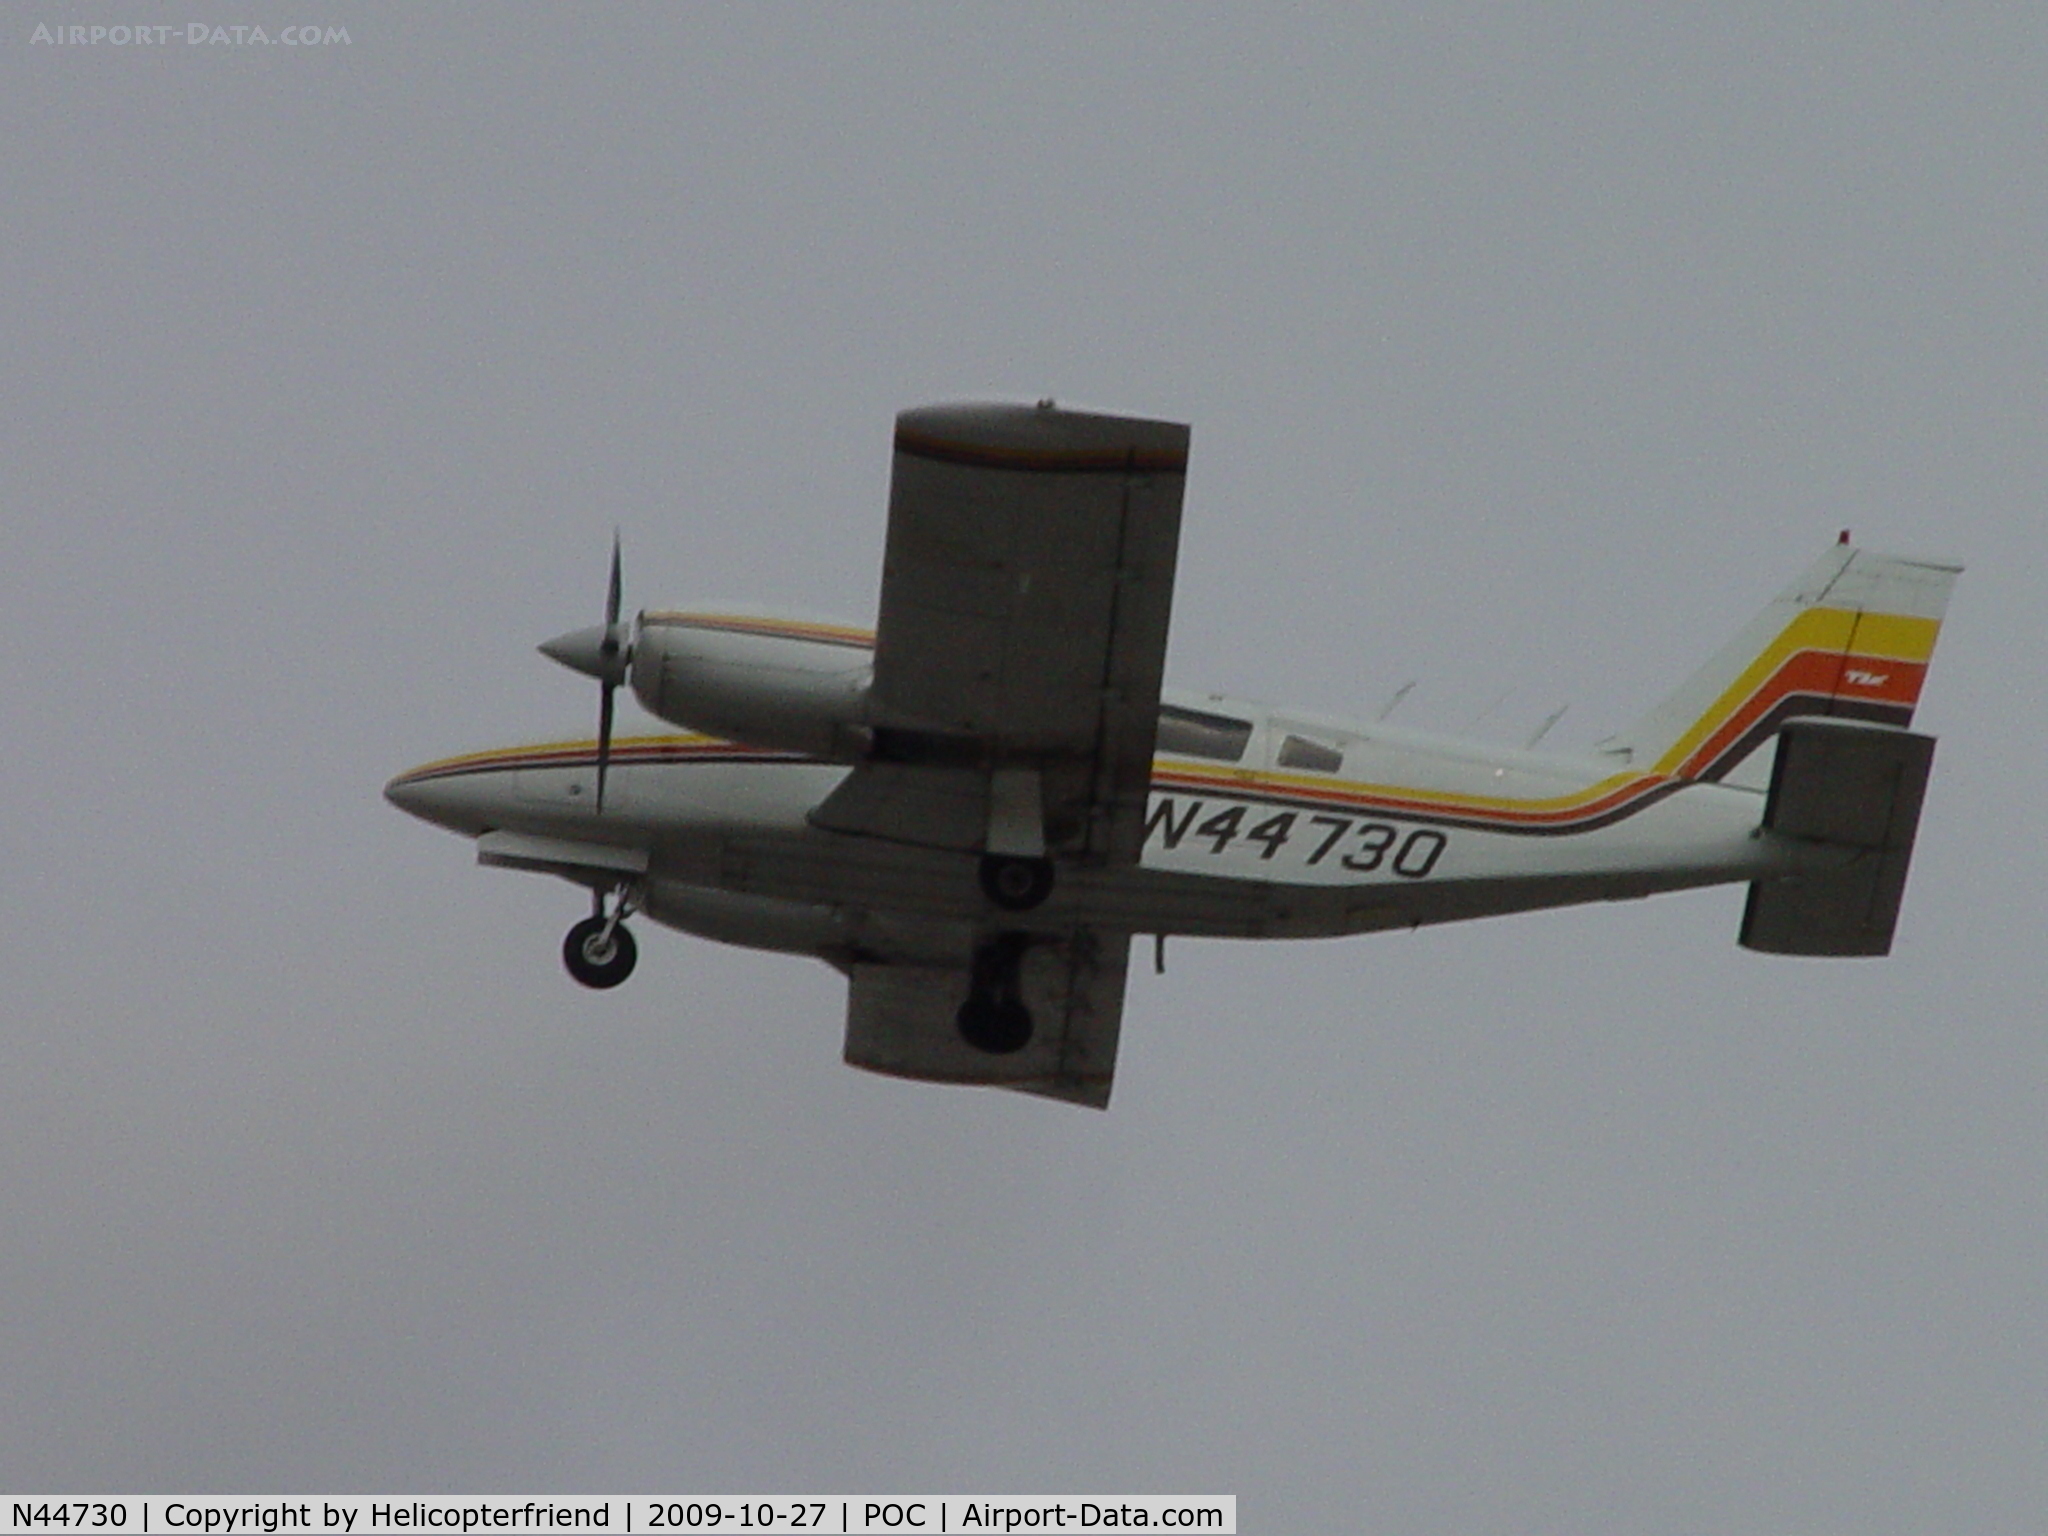 N44730, 1974 Piper PA-34-200T Seneca II C/N 34-7570005, Taking off from runway 26L and climbing out